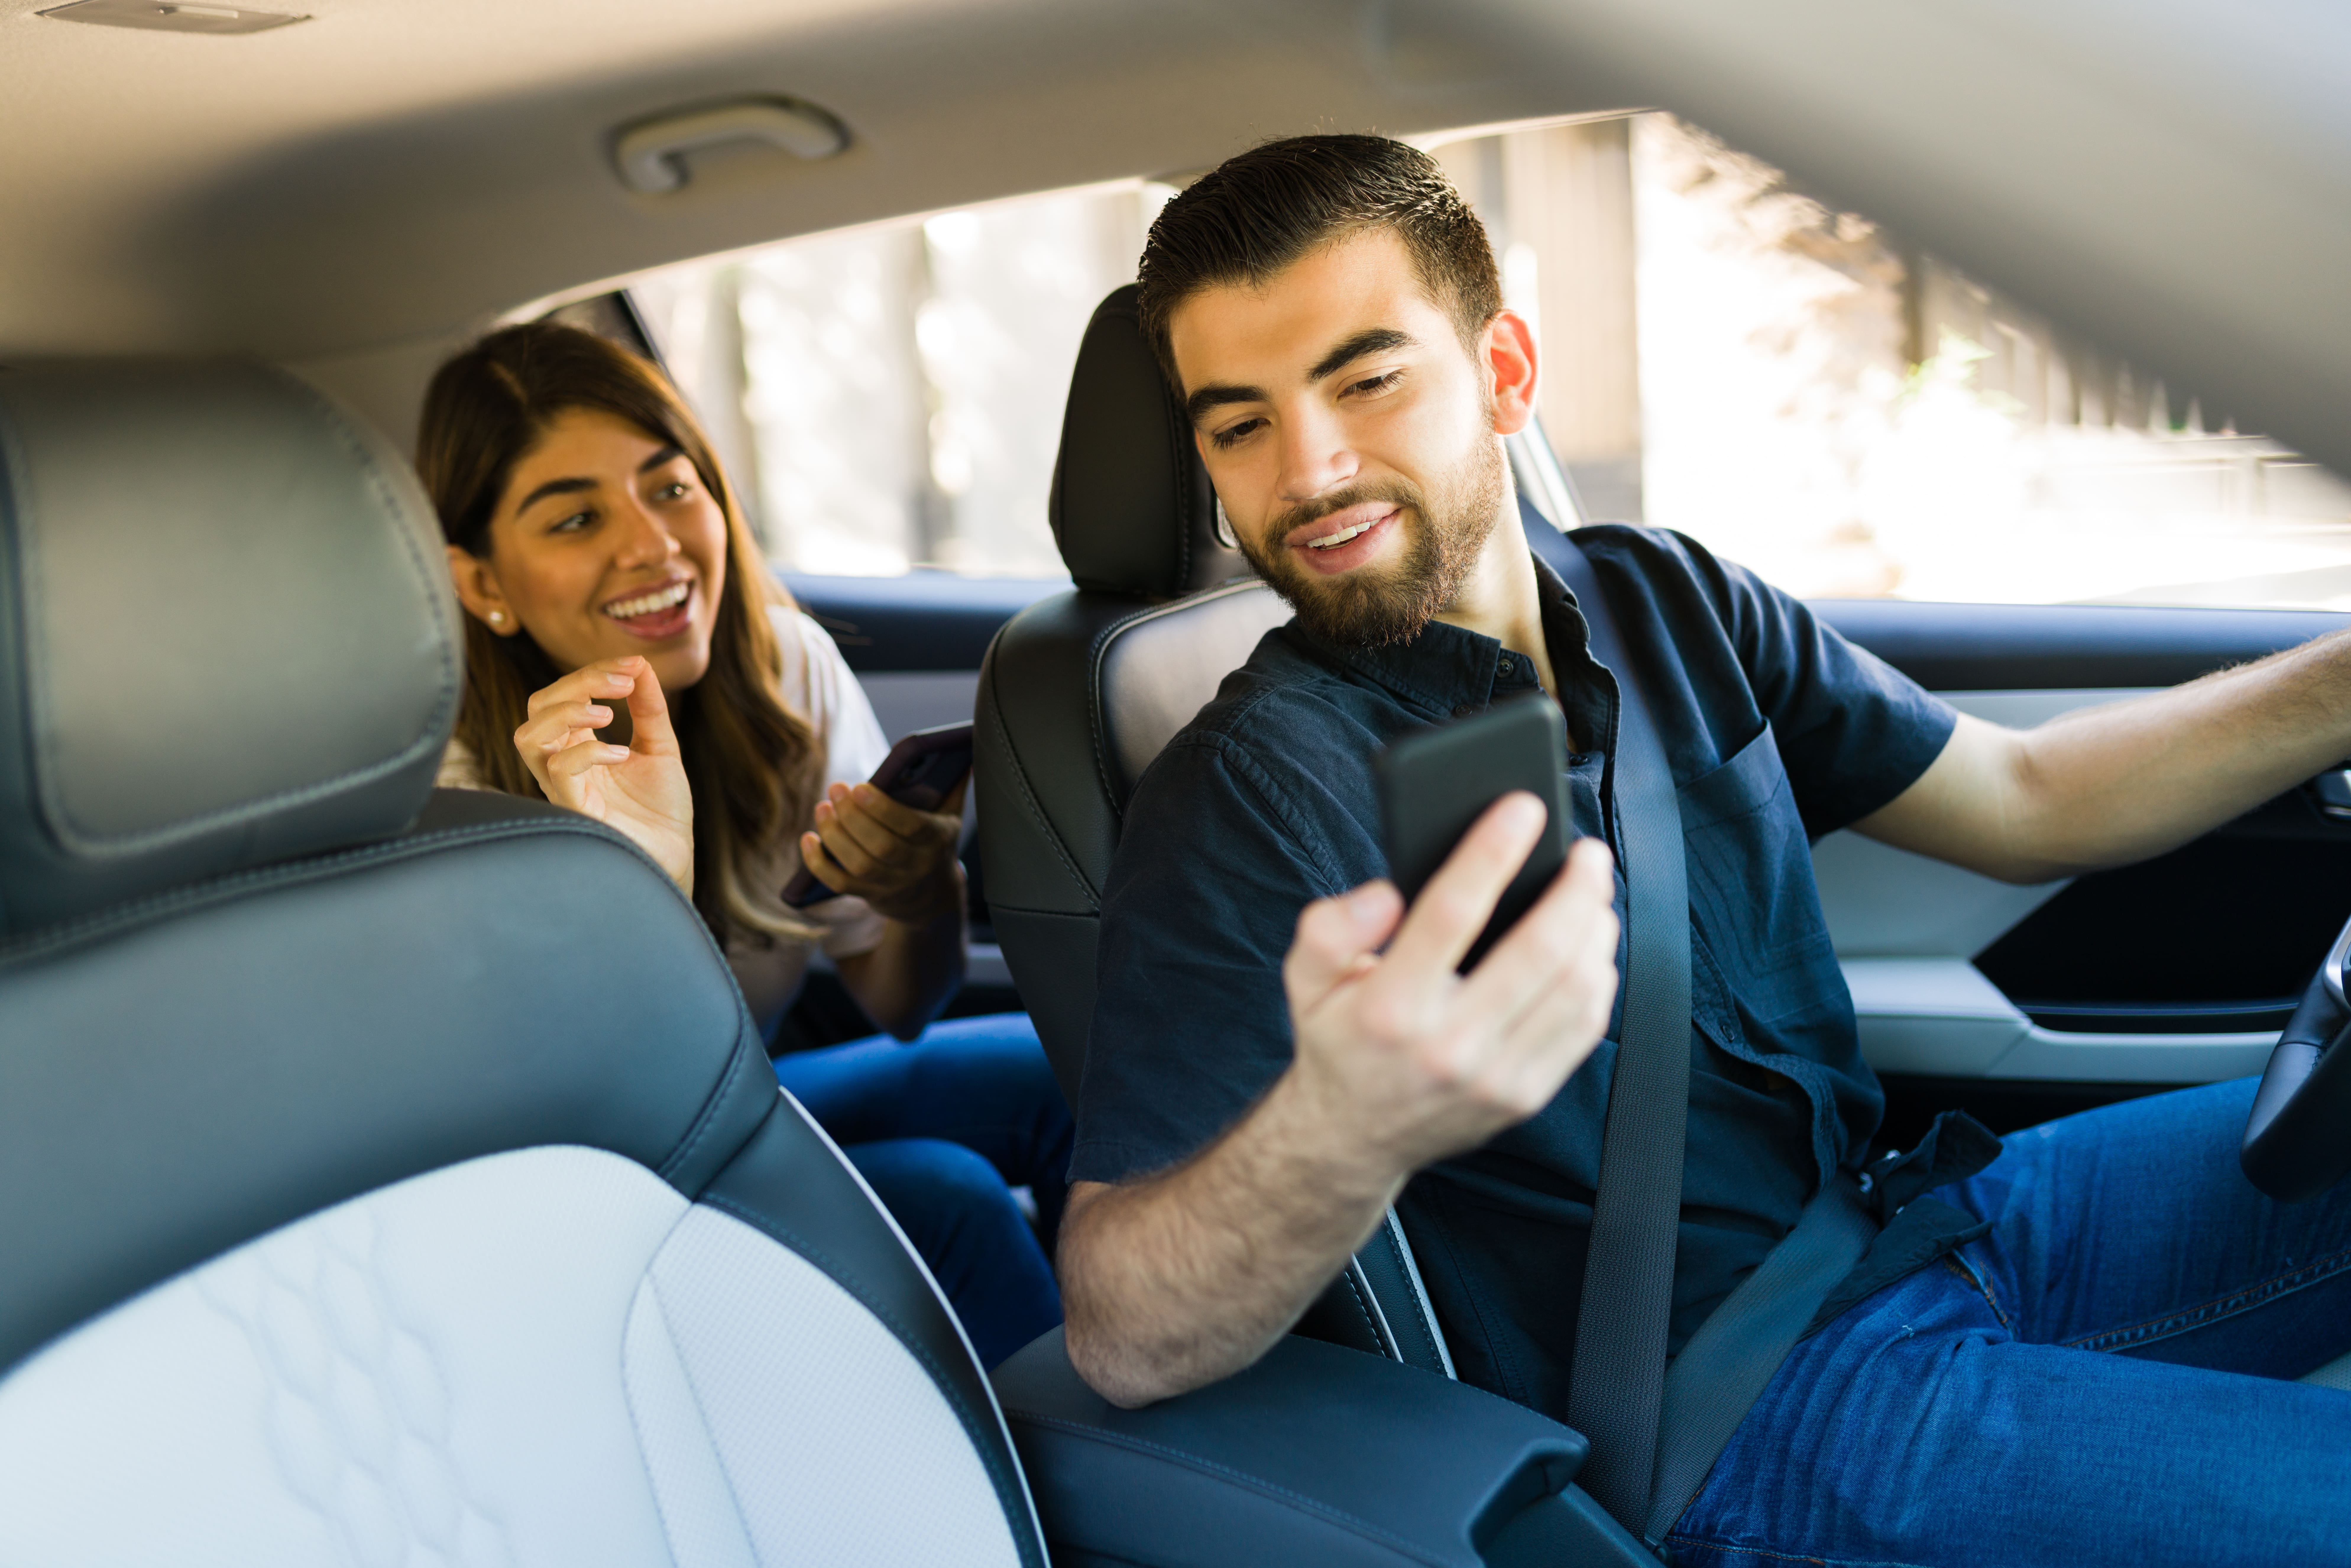 Making sure your driver is not distracted by their phone can prevent rideshare accidents